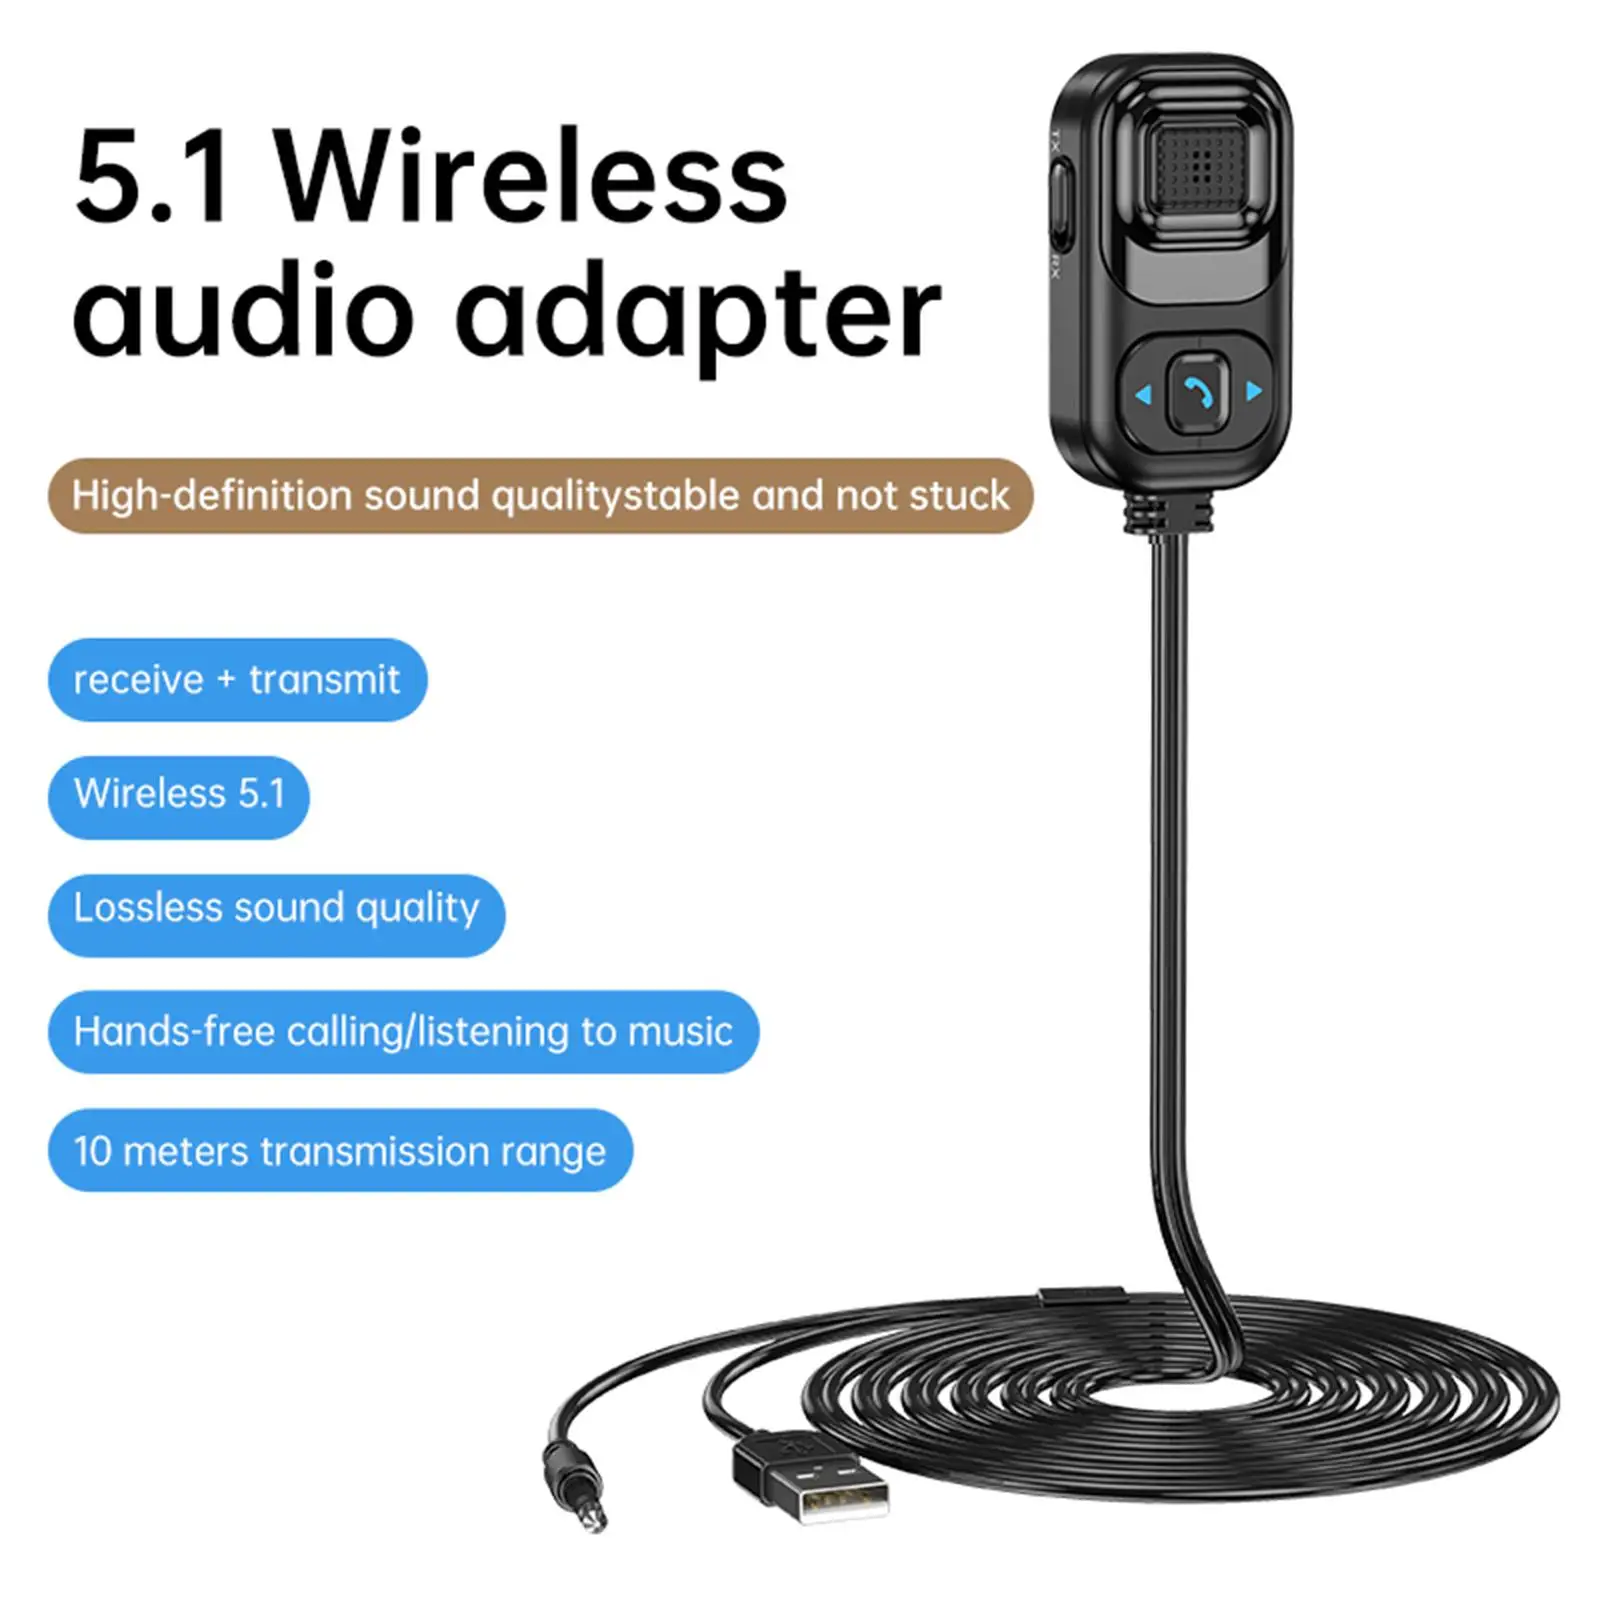 2 in 1 Audio Adapter Transmitter Receiver Bluetooth 5.1 Speakers Tablet